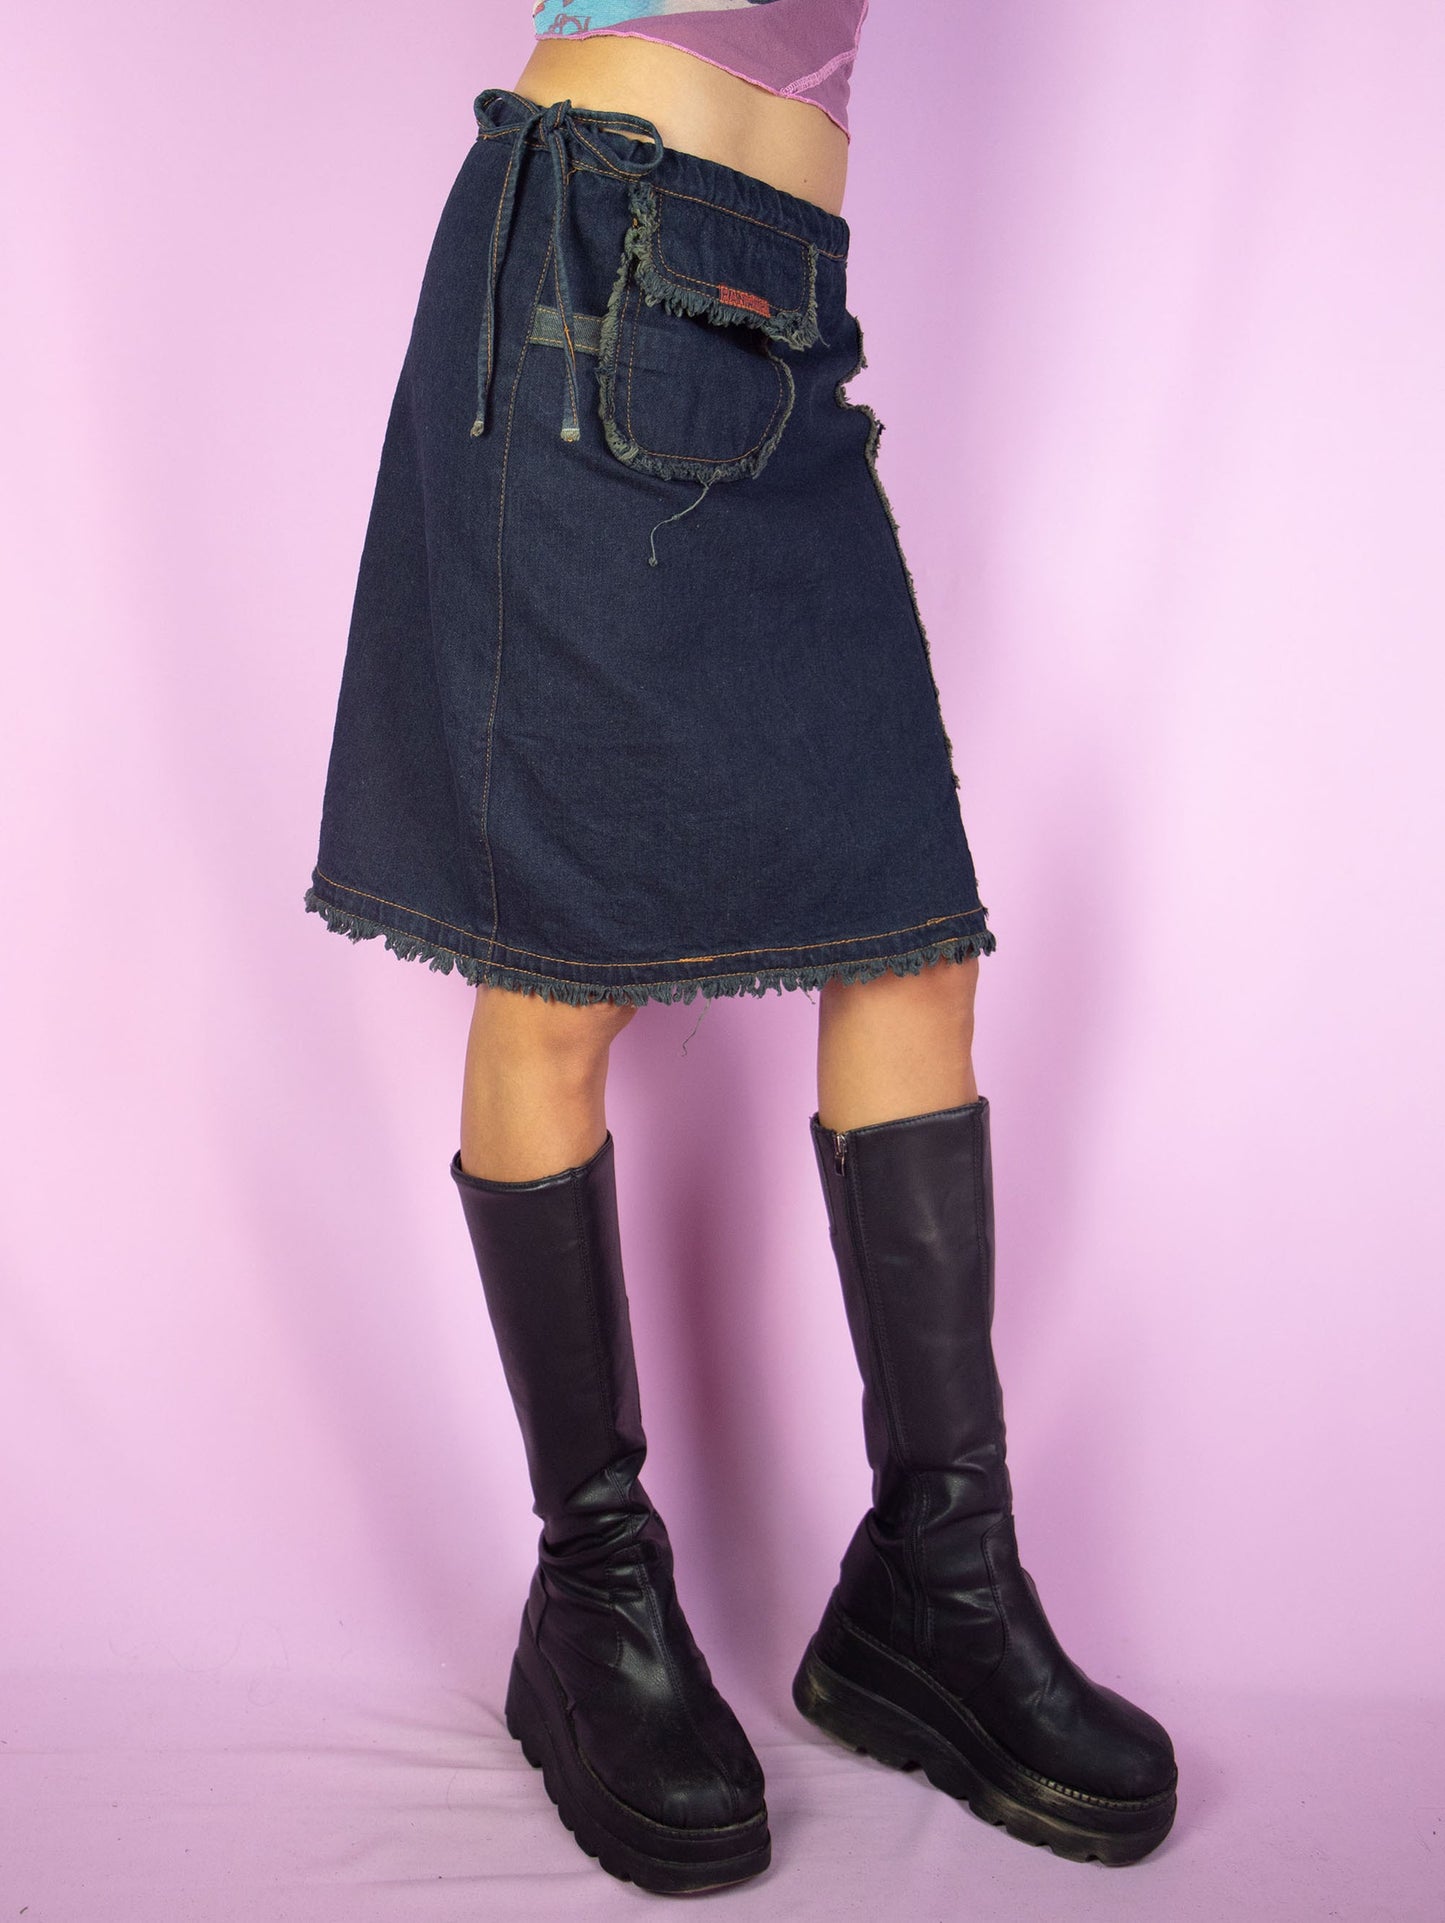 The Y2K Asymmetric Denim Mini Skirt is a vintage dark denim navy blue skirt tied at the side with a pocket and frayed seam details. Cyber goth grunge 2000s subversive gorpcore jean skirt.